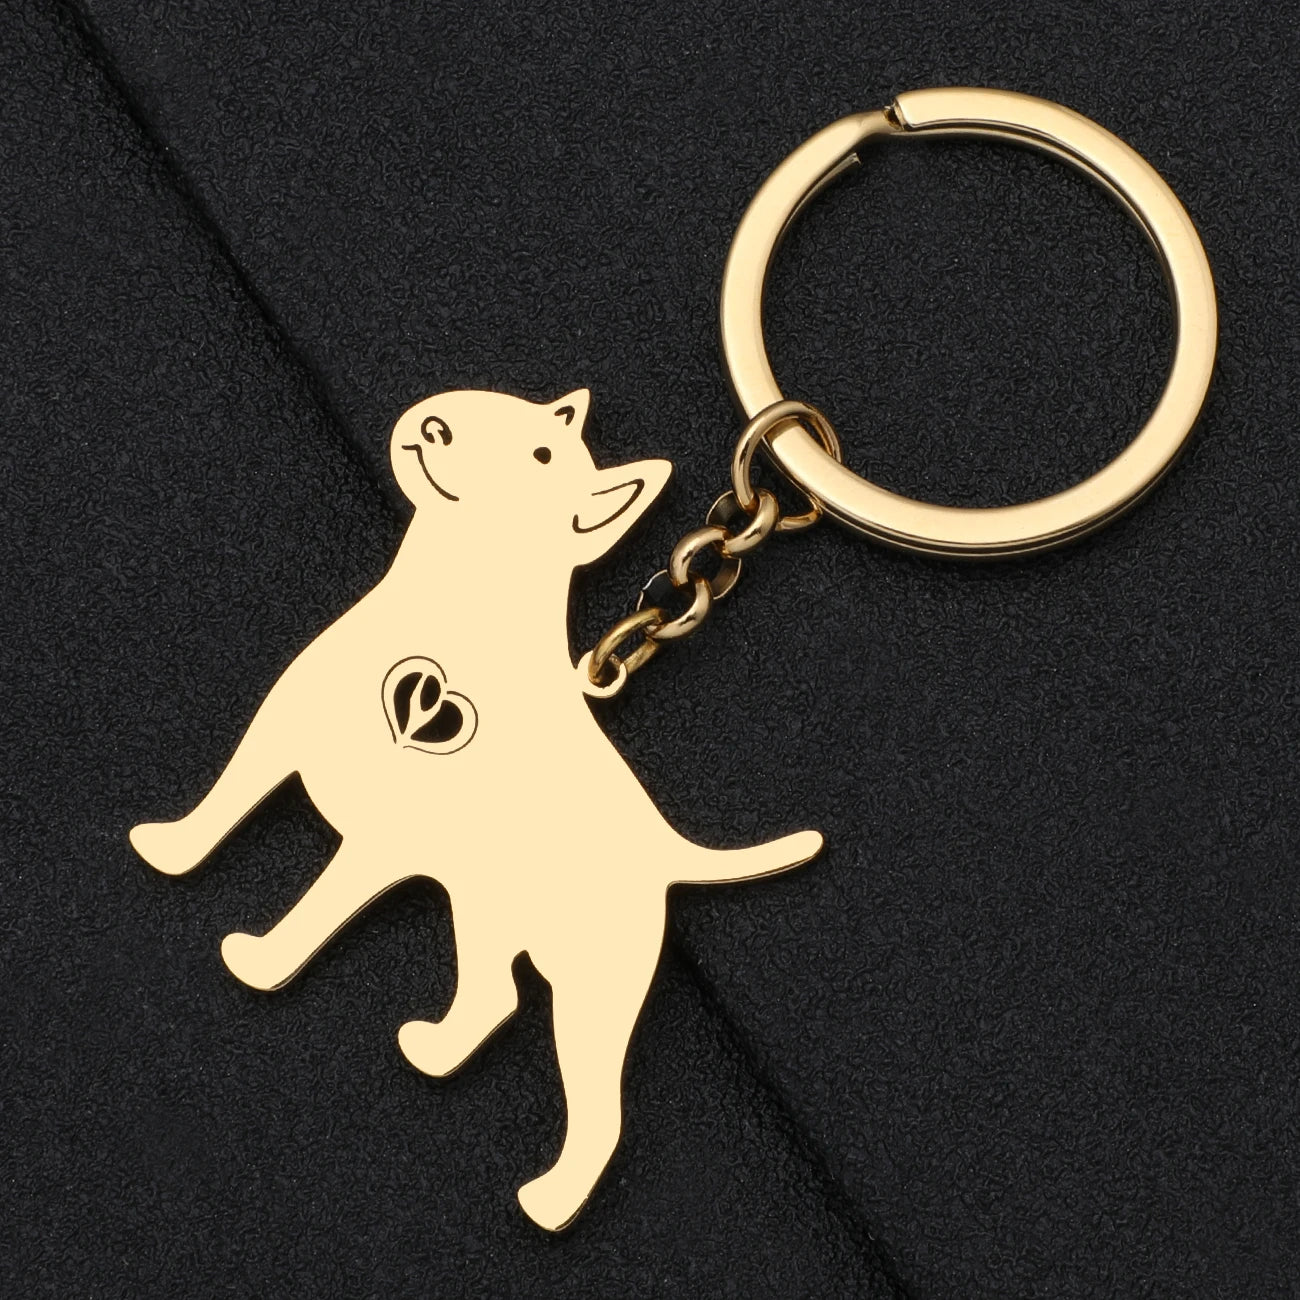 Bull Terrier Keychains Pack by SB